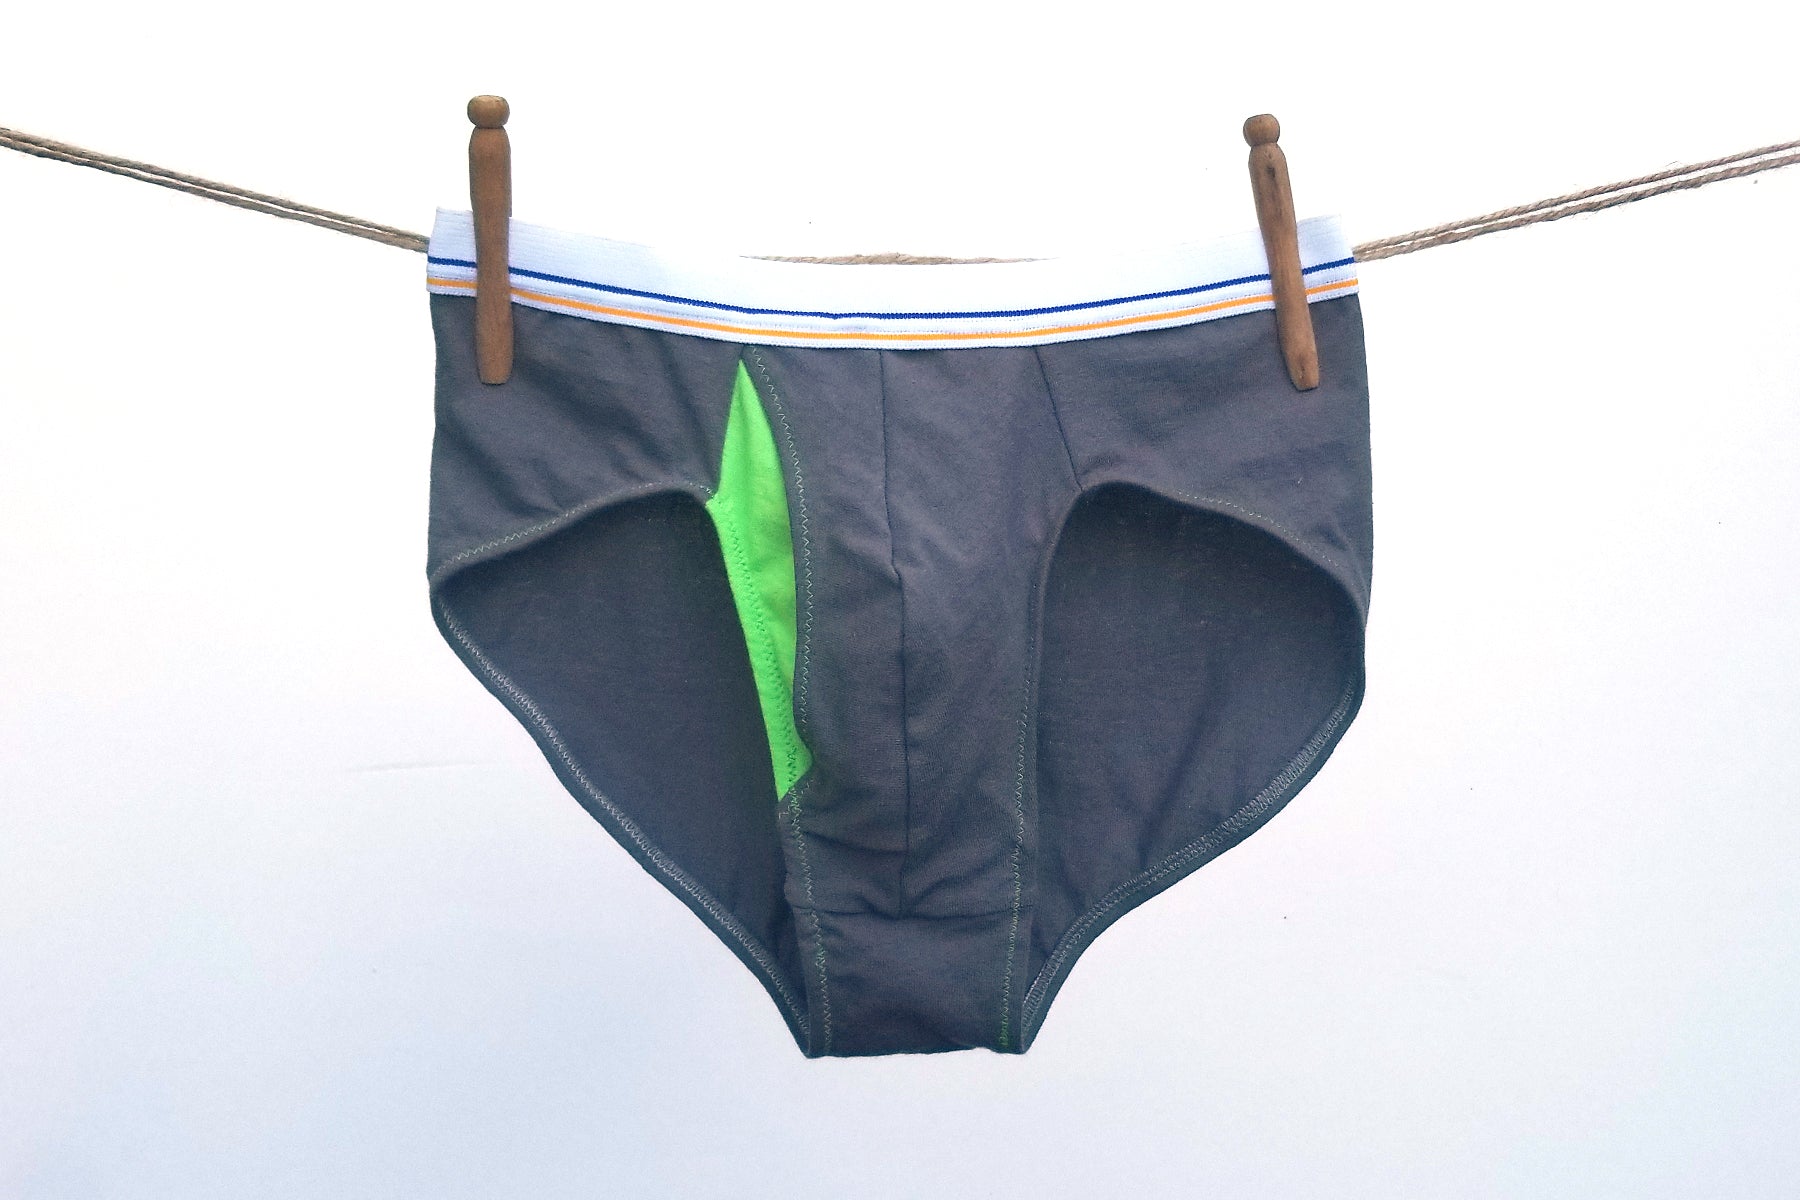 Packing Underwear for Transgender Men: A Guide to Using STP